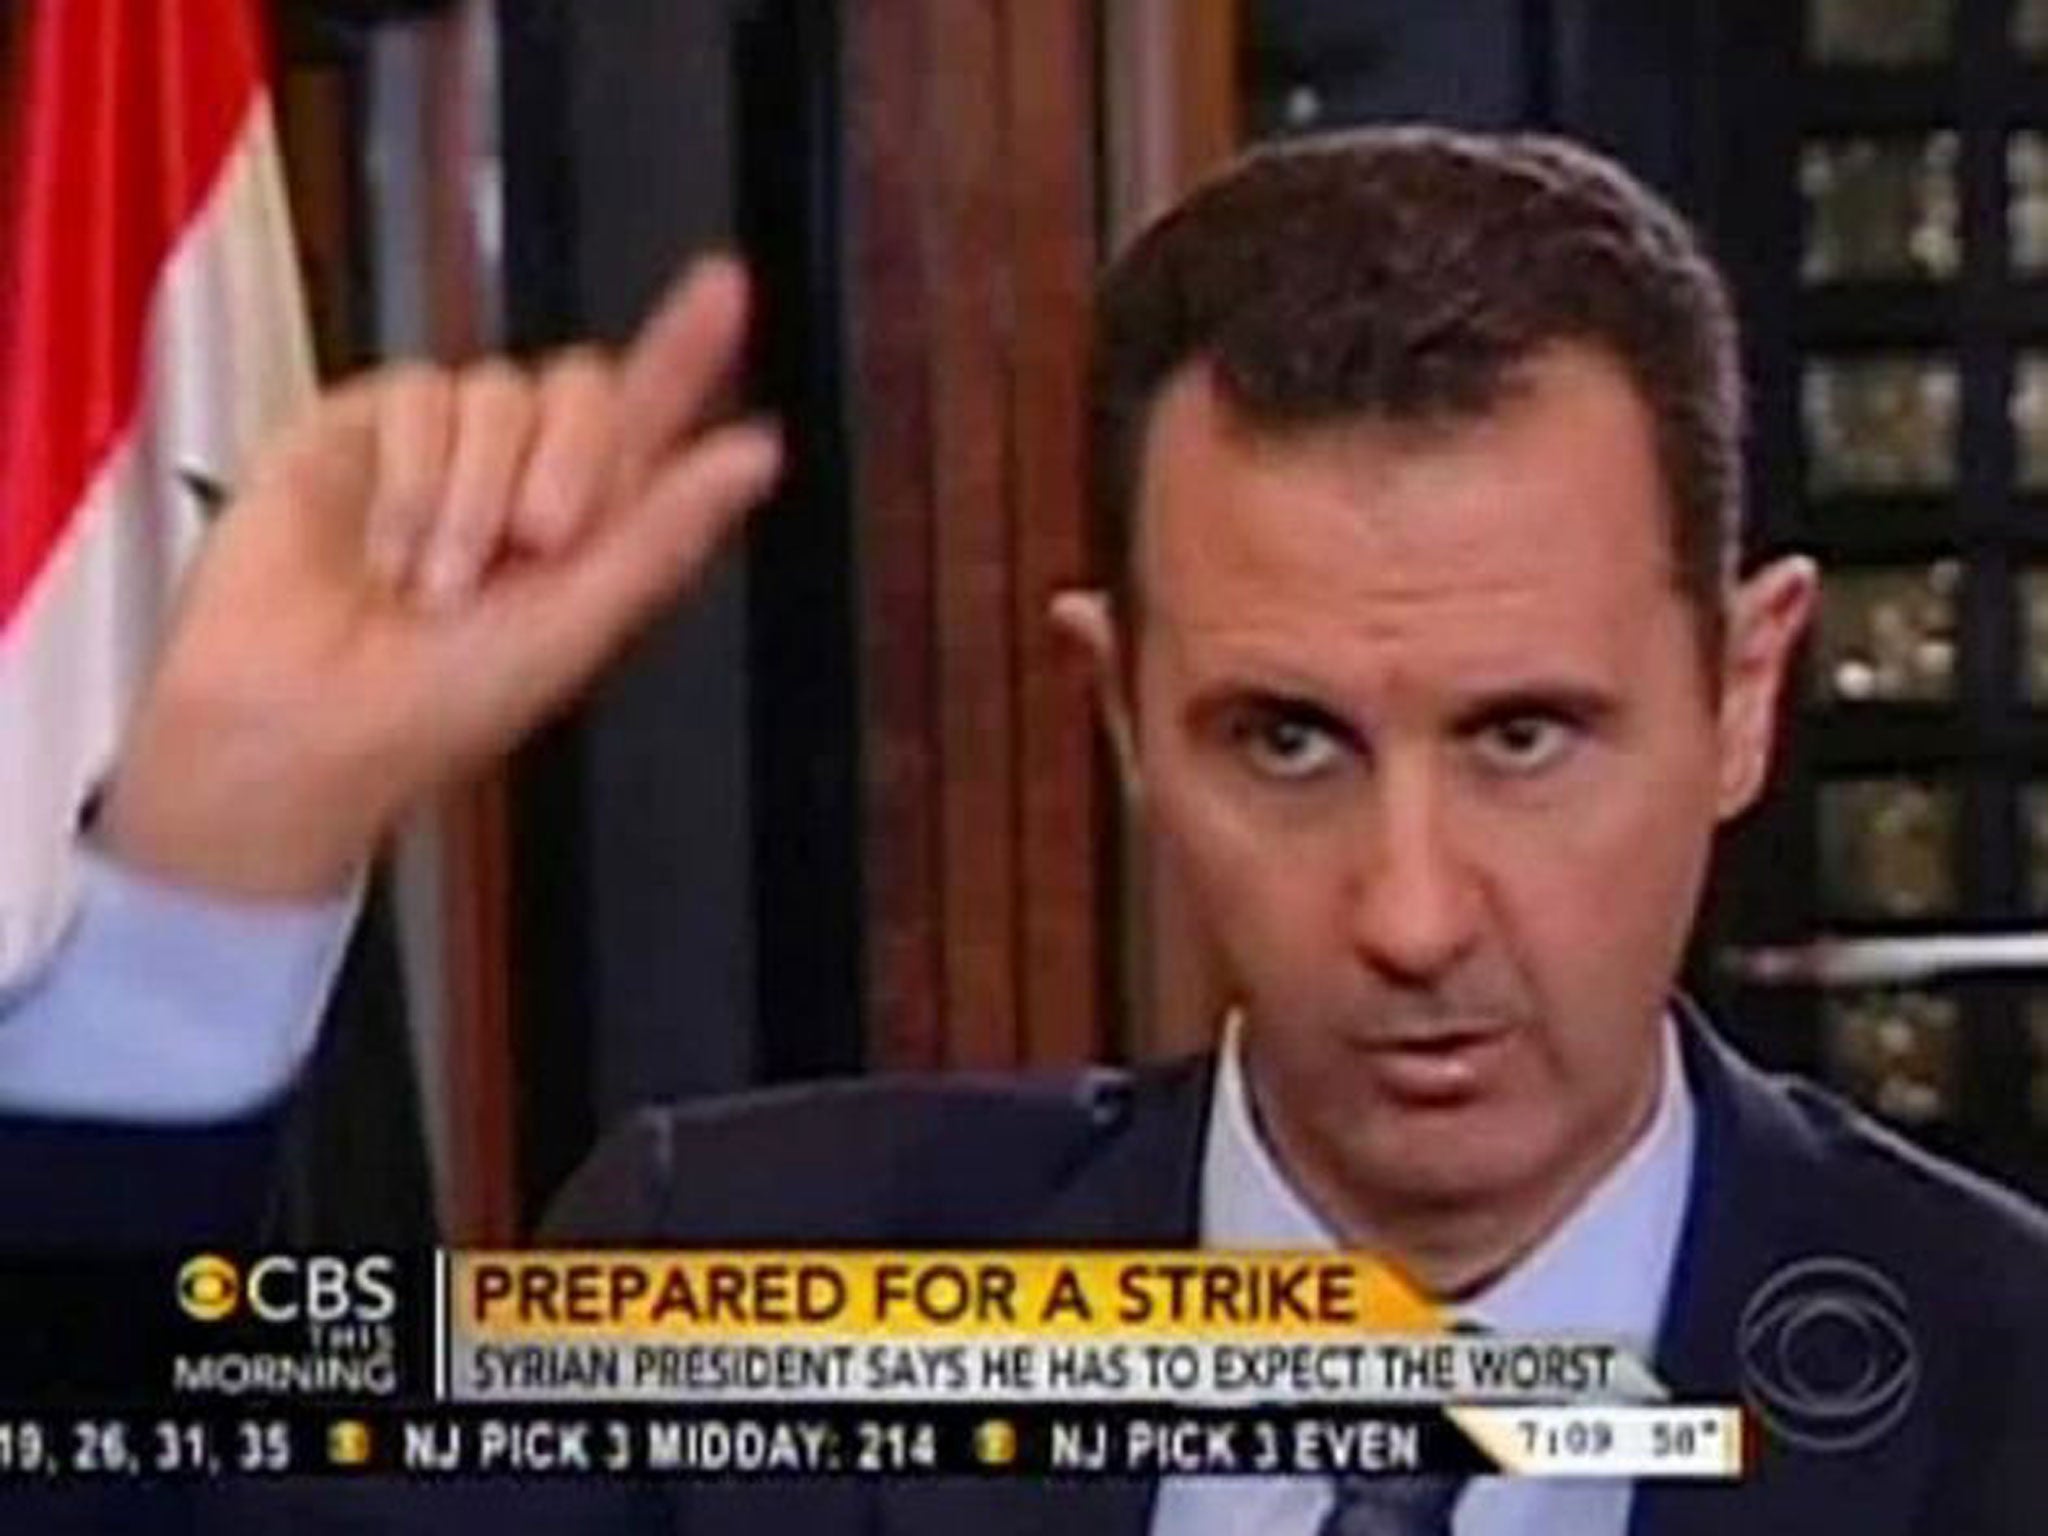 In this frame grab from video provided by CBS This Morning, Syrian President Bashar al-Assad warns there will be "repercussions" for the US if it launches a military strike. Assad said, "You should expect everything."